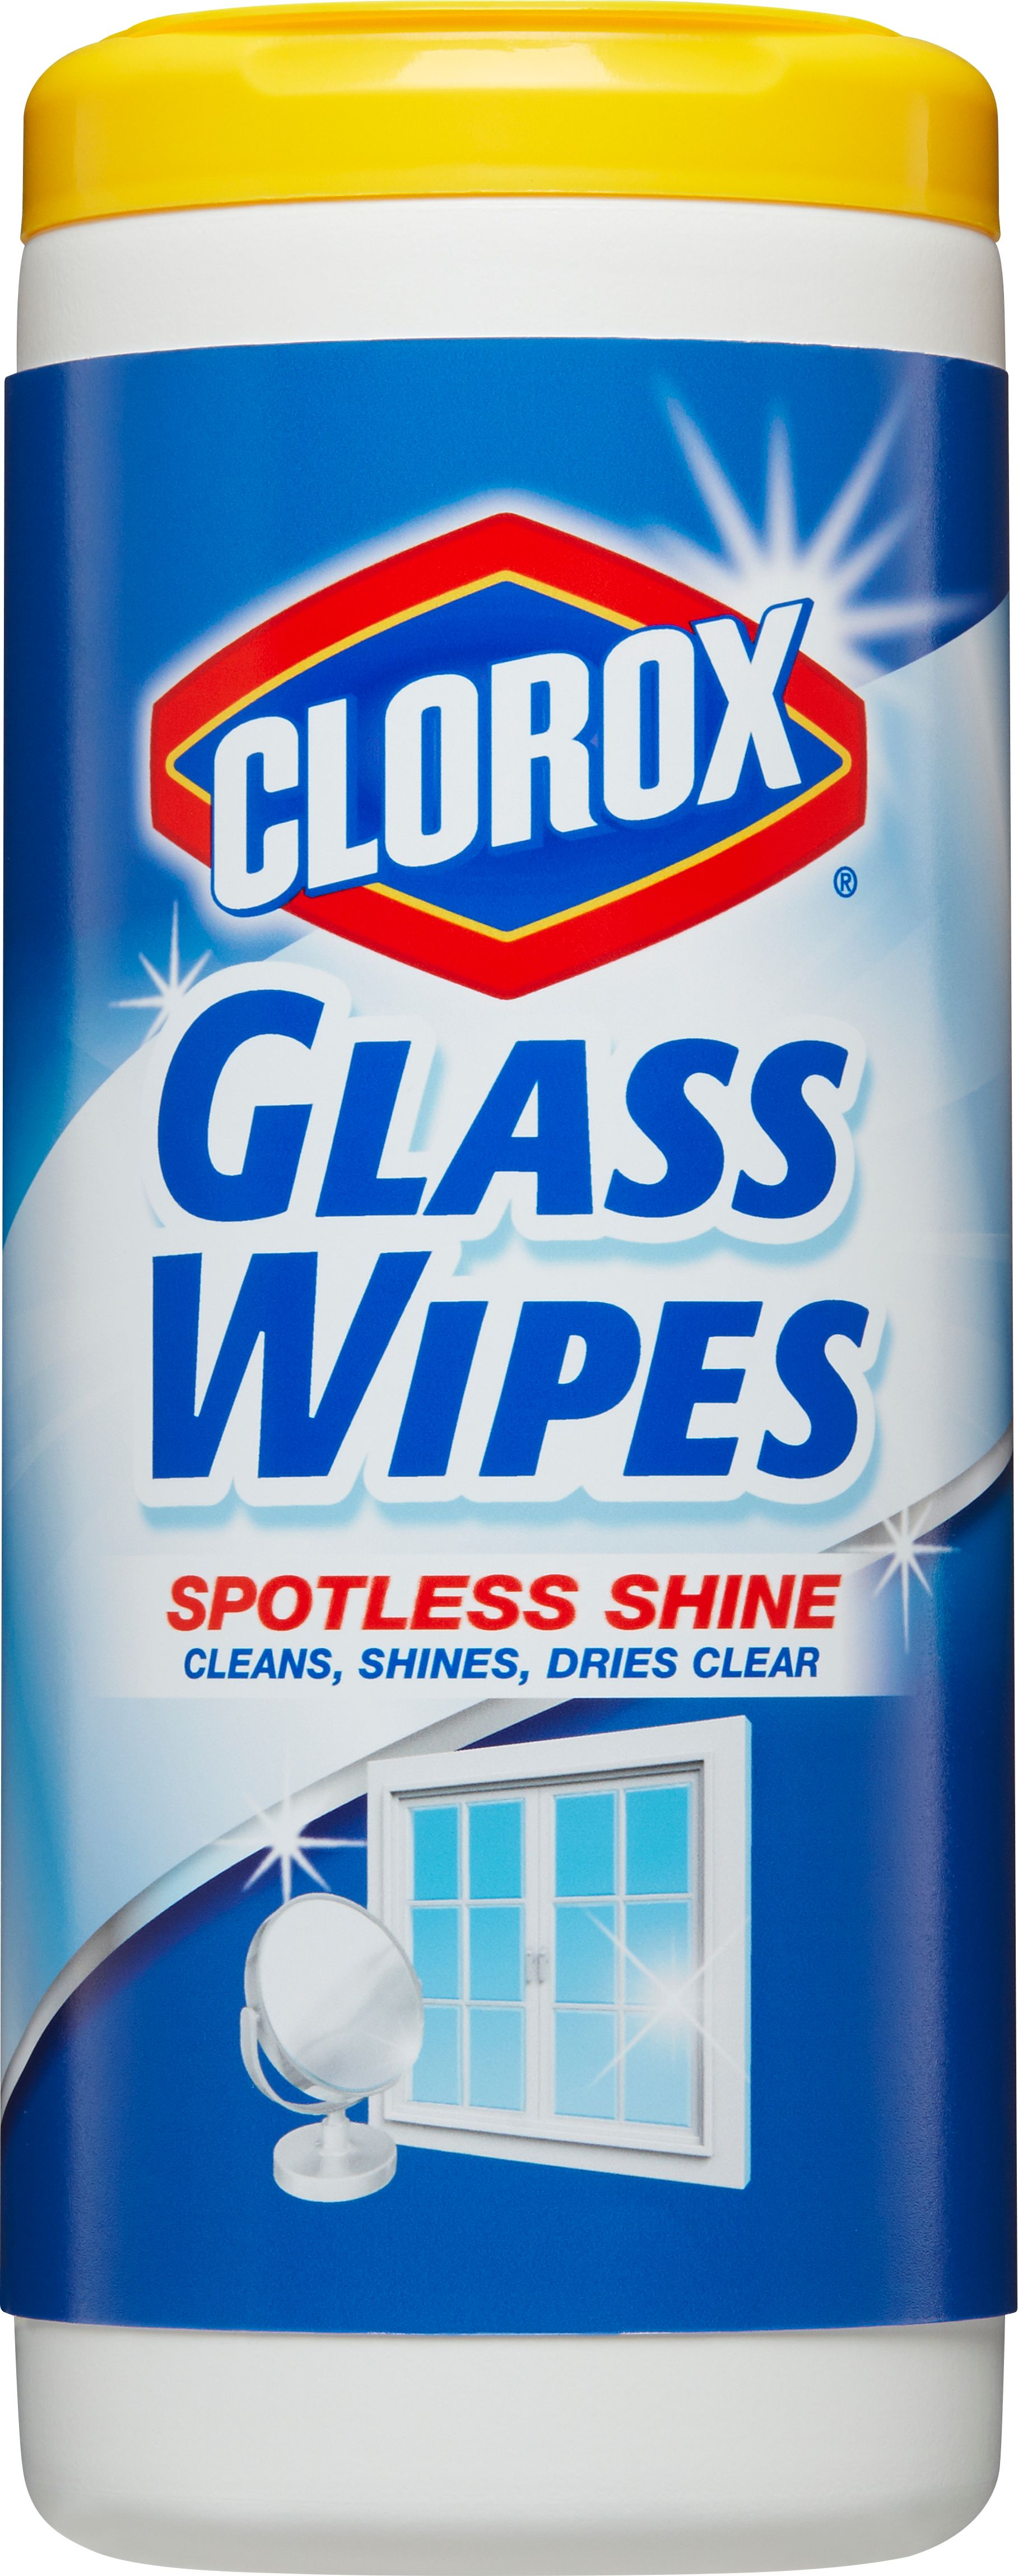 Clorox Glass Wipes, Streak Free Cleaning Wipes - Radiant Clean, 32 Count - image 5 of 8